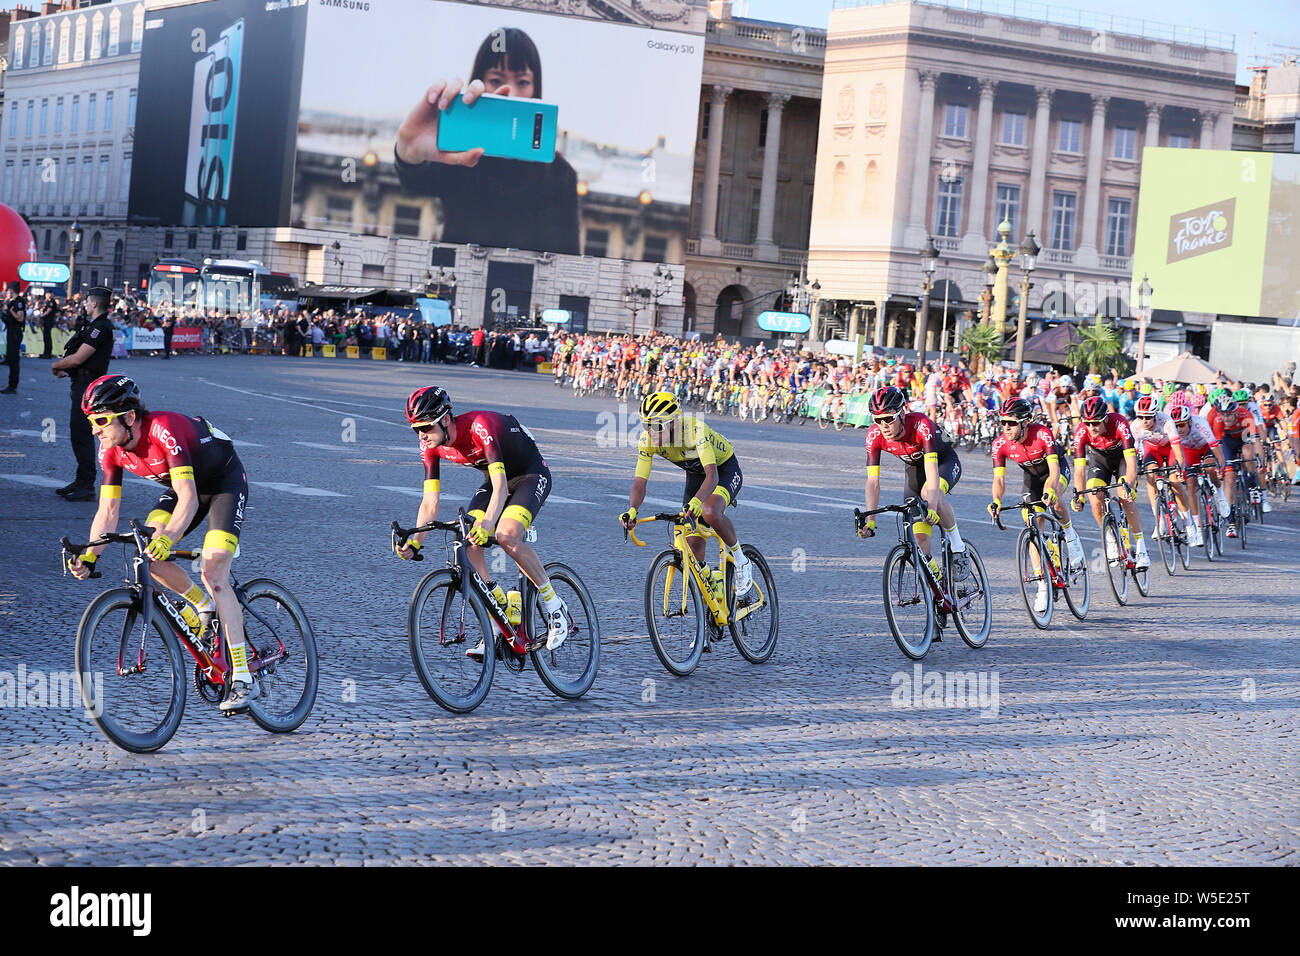 Paris - 27-07-2019, cycling, Stage 21, etappe 21, Rambouillet - Paris, champs-elysees, team of the yellow jersey on the way to the finish at the champs elysees Stock Photo